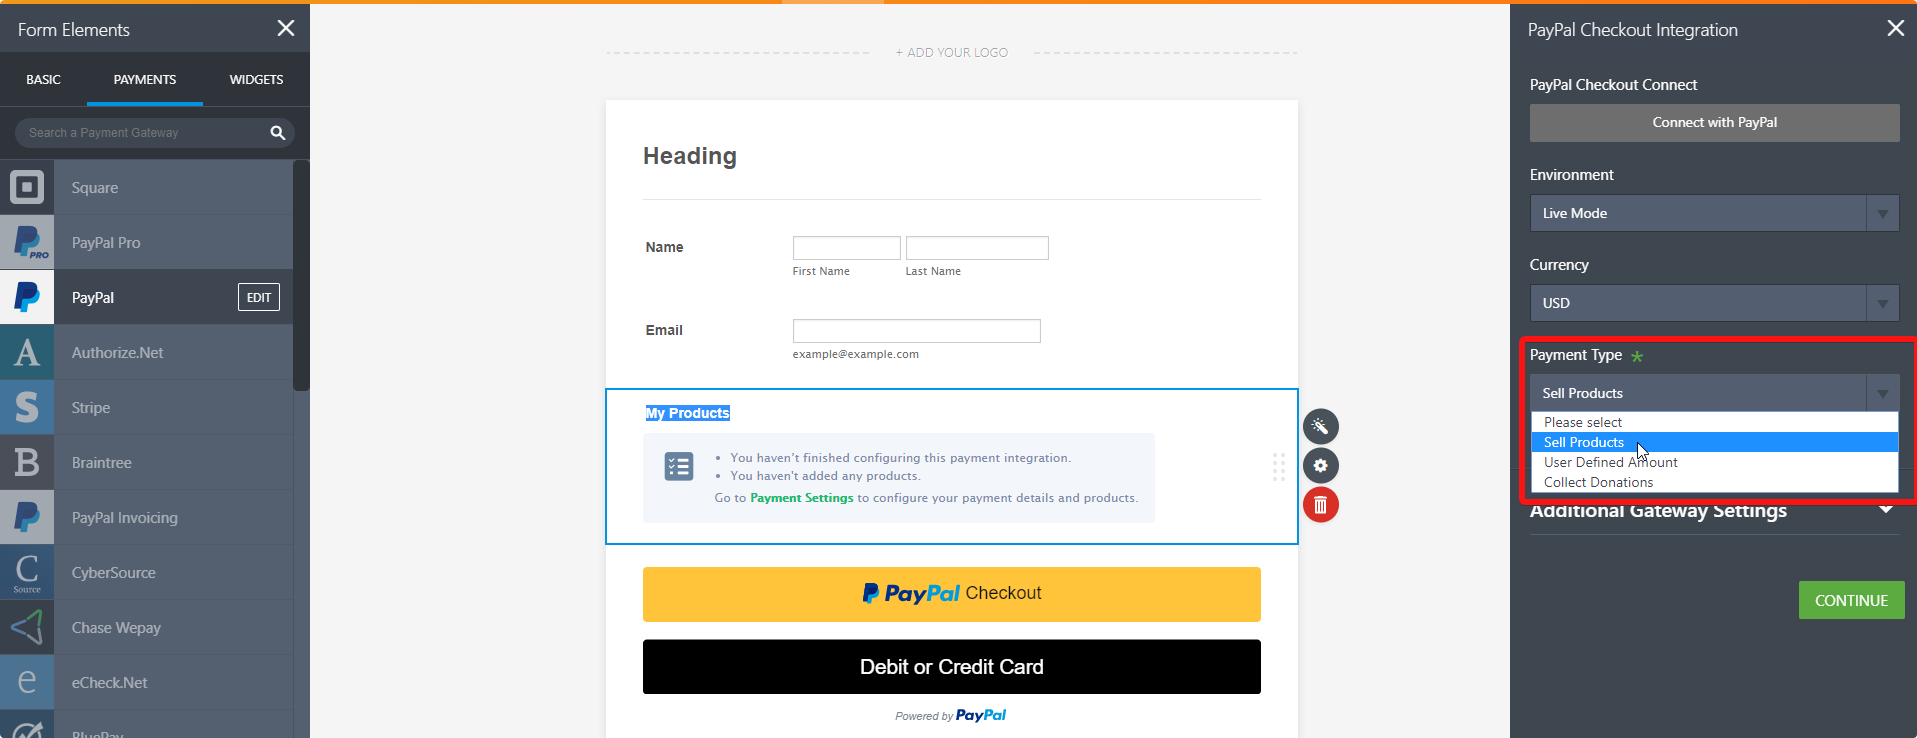 PayPal Subscription Payments Image 1 Screenshot 30